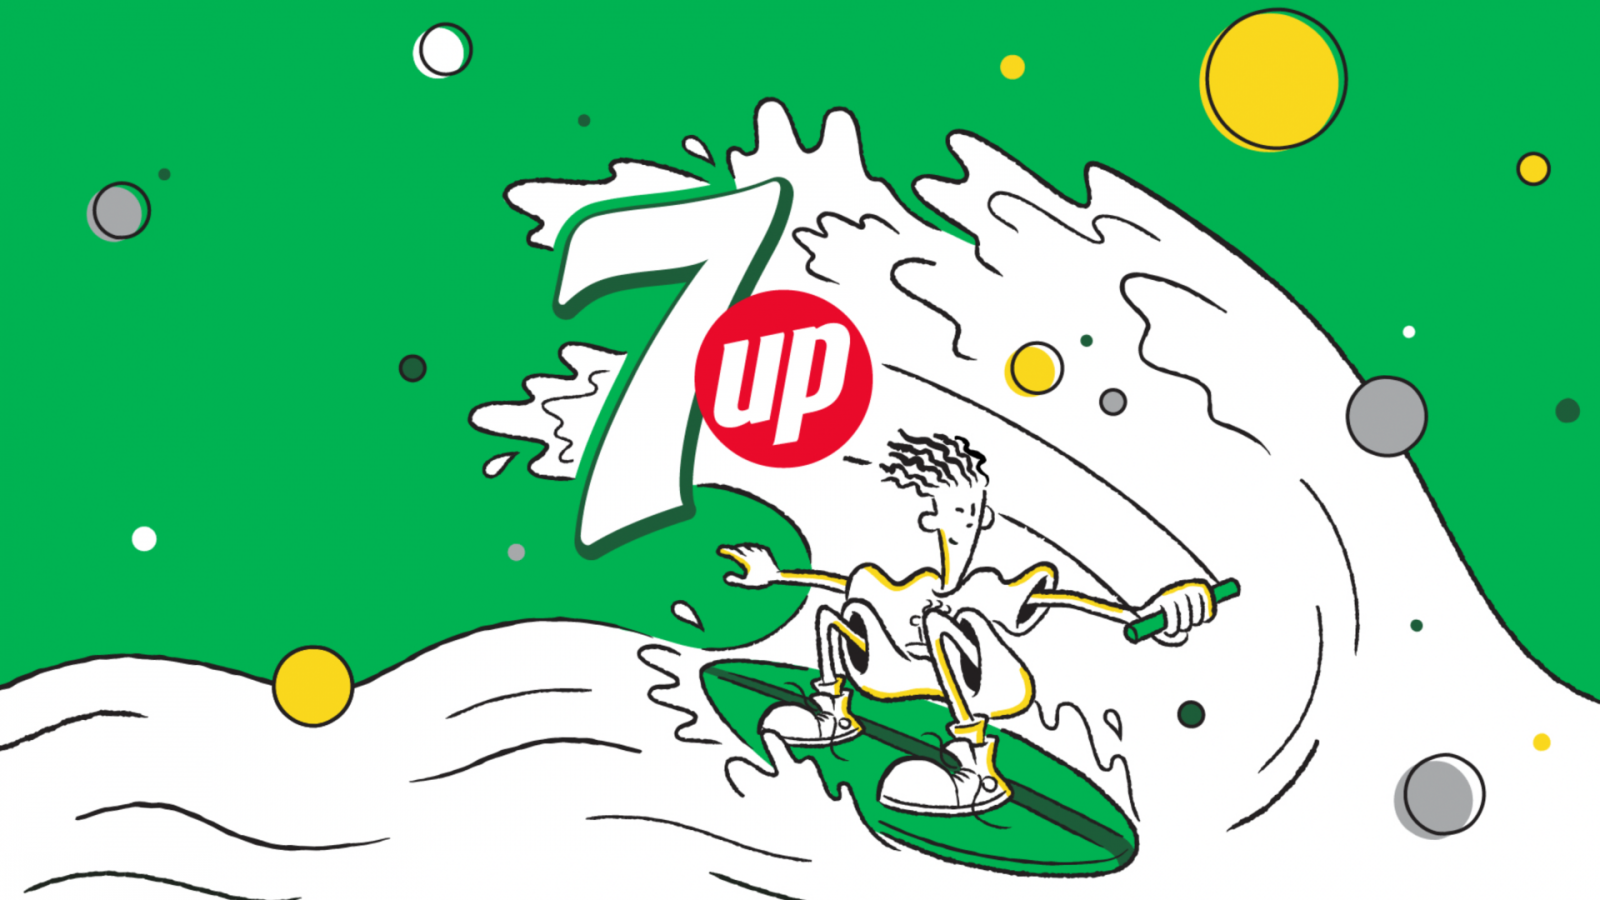 chiến dịch marketing 7Up